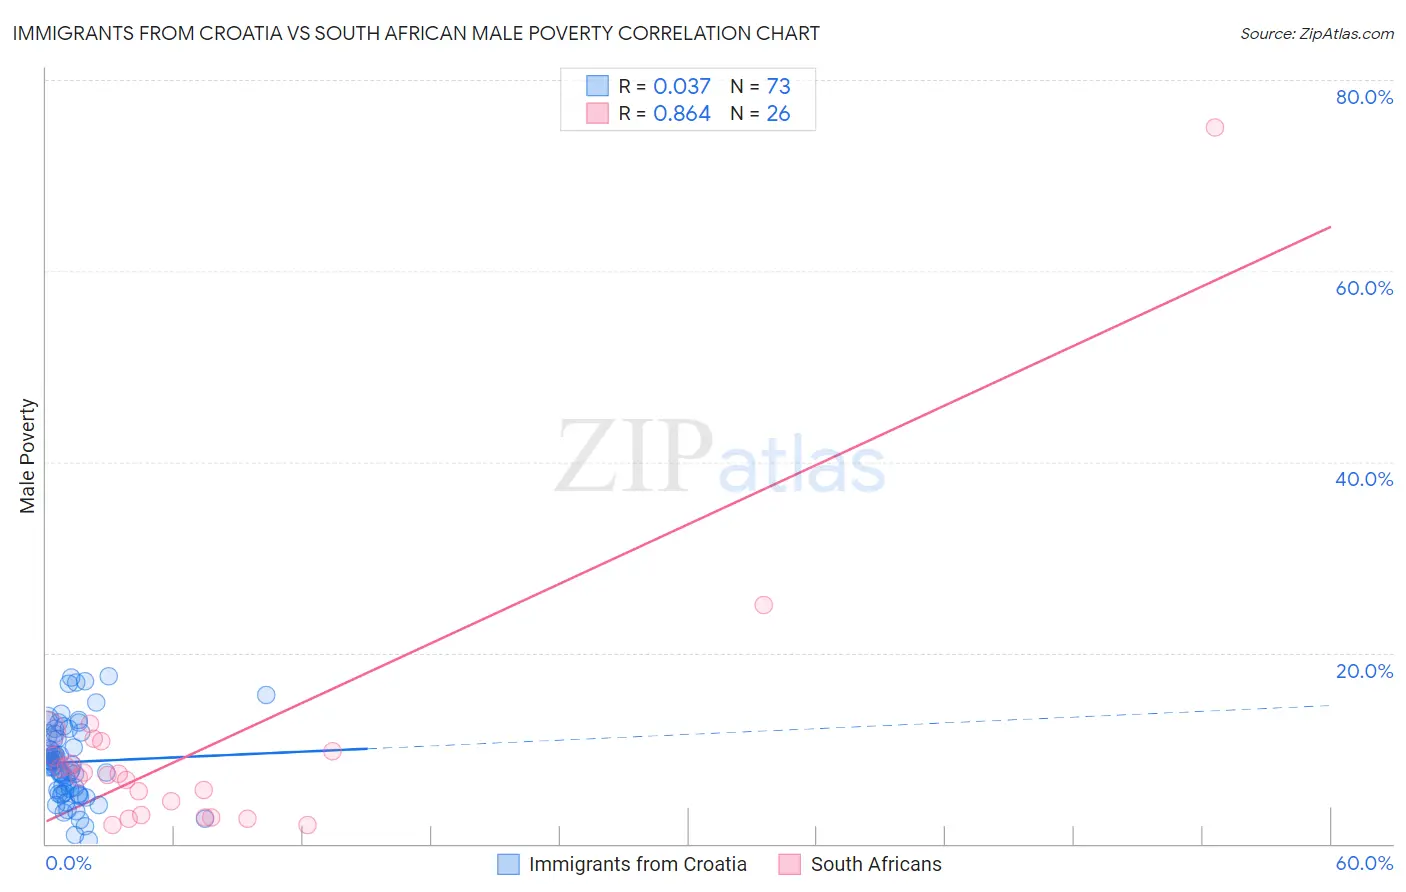 Immigrants from Croatia vs South African Male Poverty